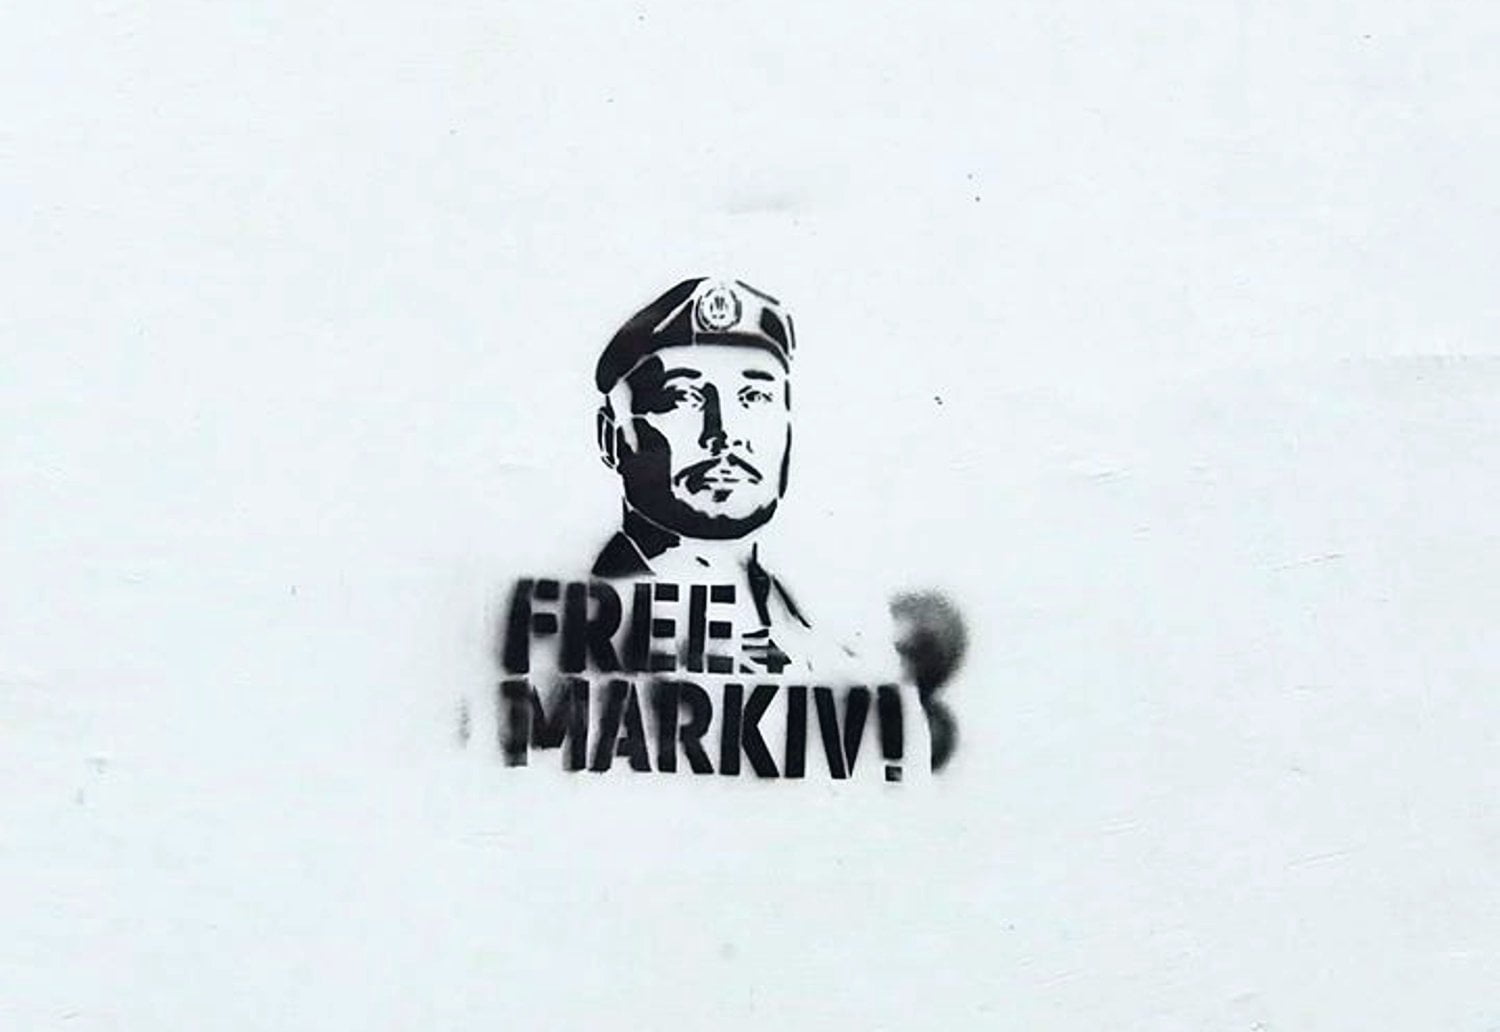 Journalists started a crowdfunding campaign to solve Markiv's case 7